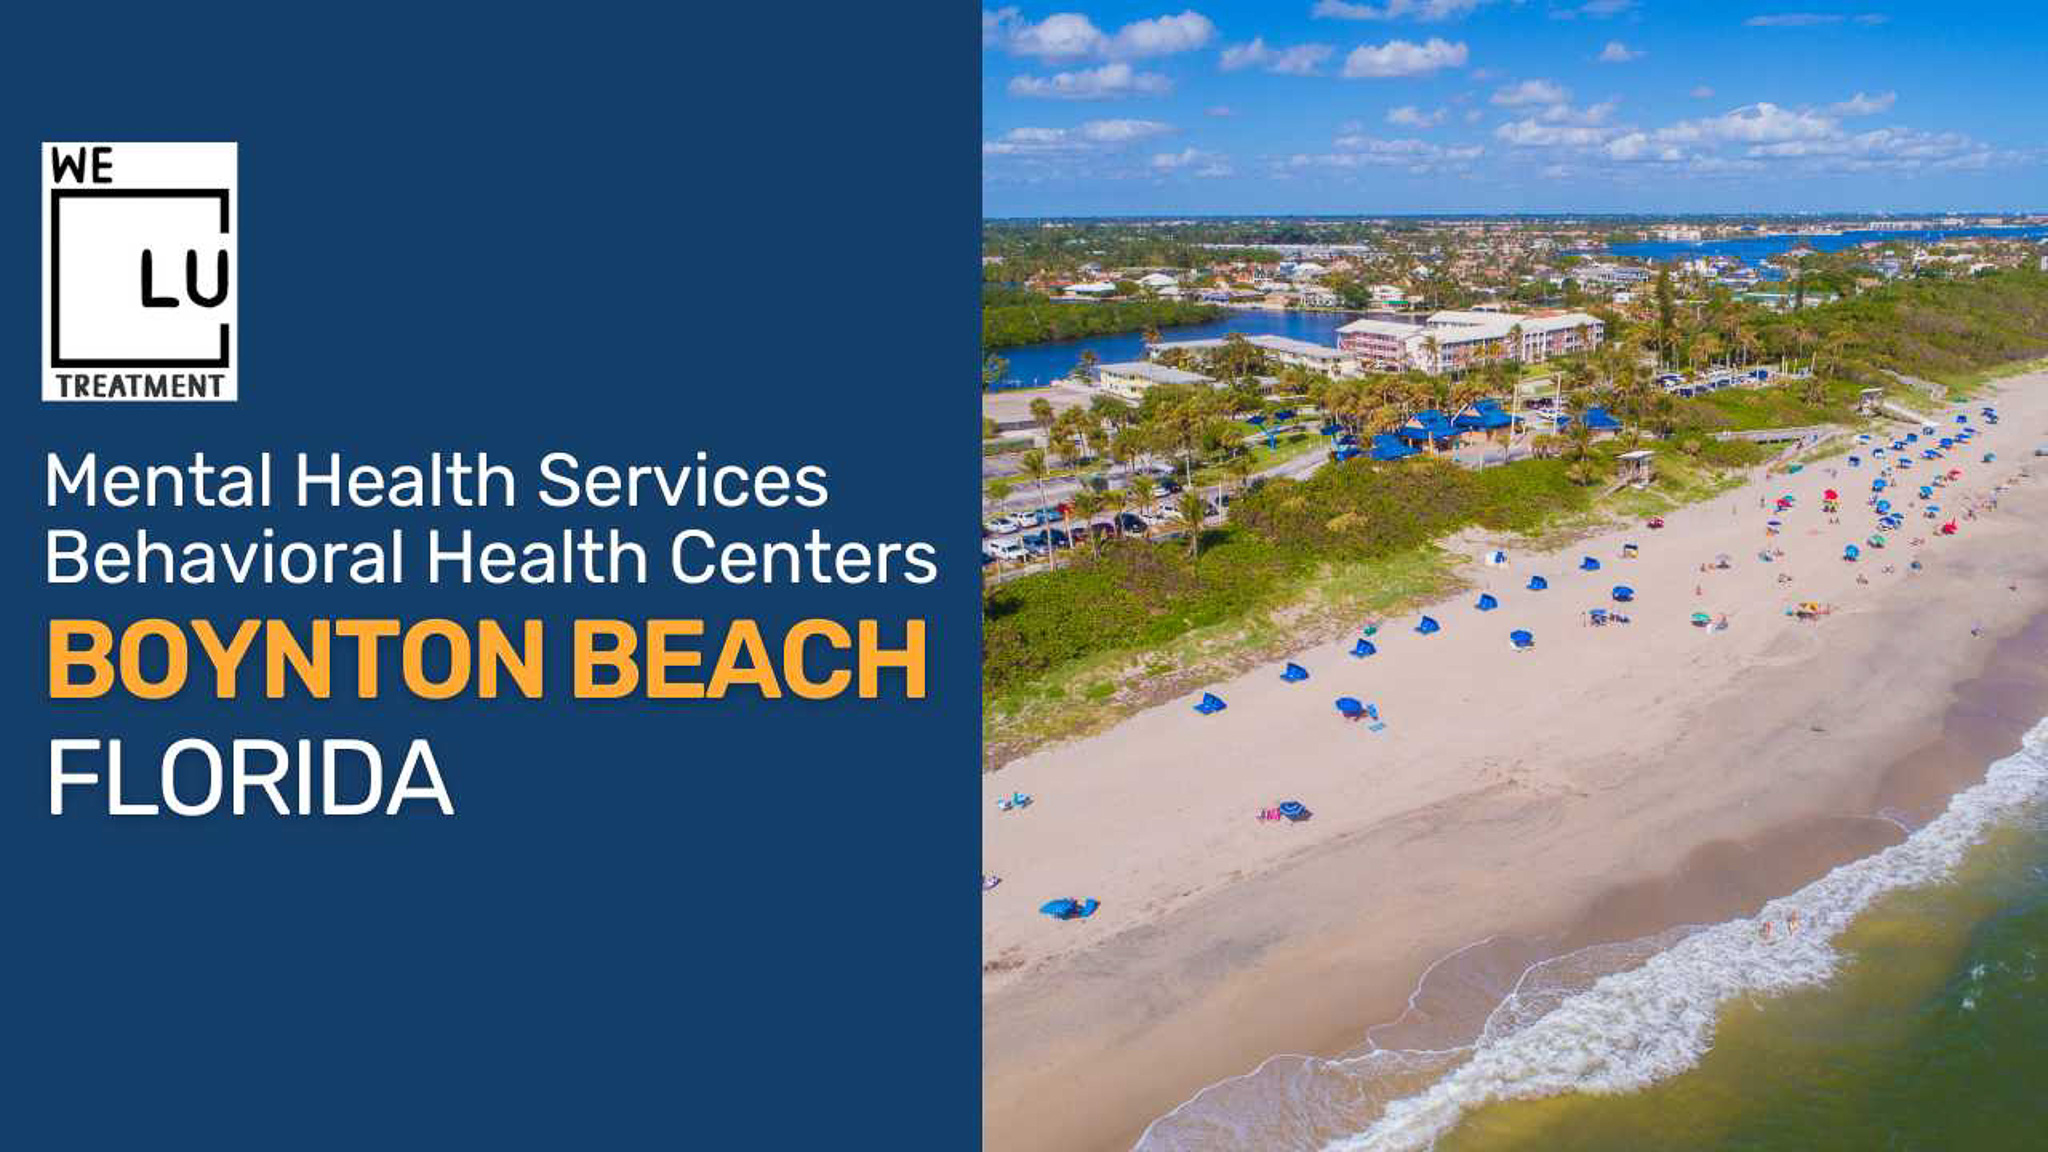 Boynton Beach FL (MH) We Level Up treatment center for drug and alcohol rehab detox and mental health services - Image 1